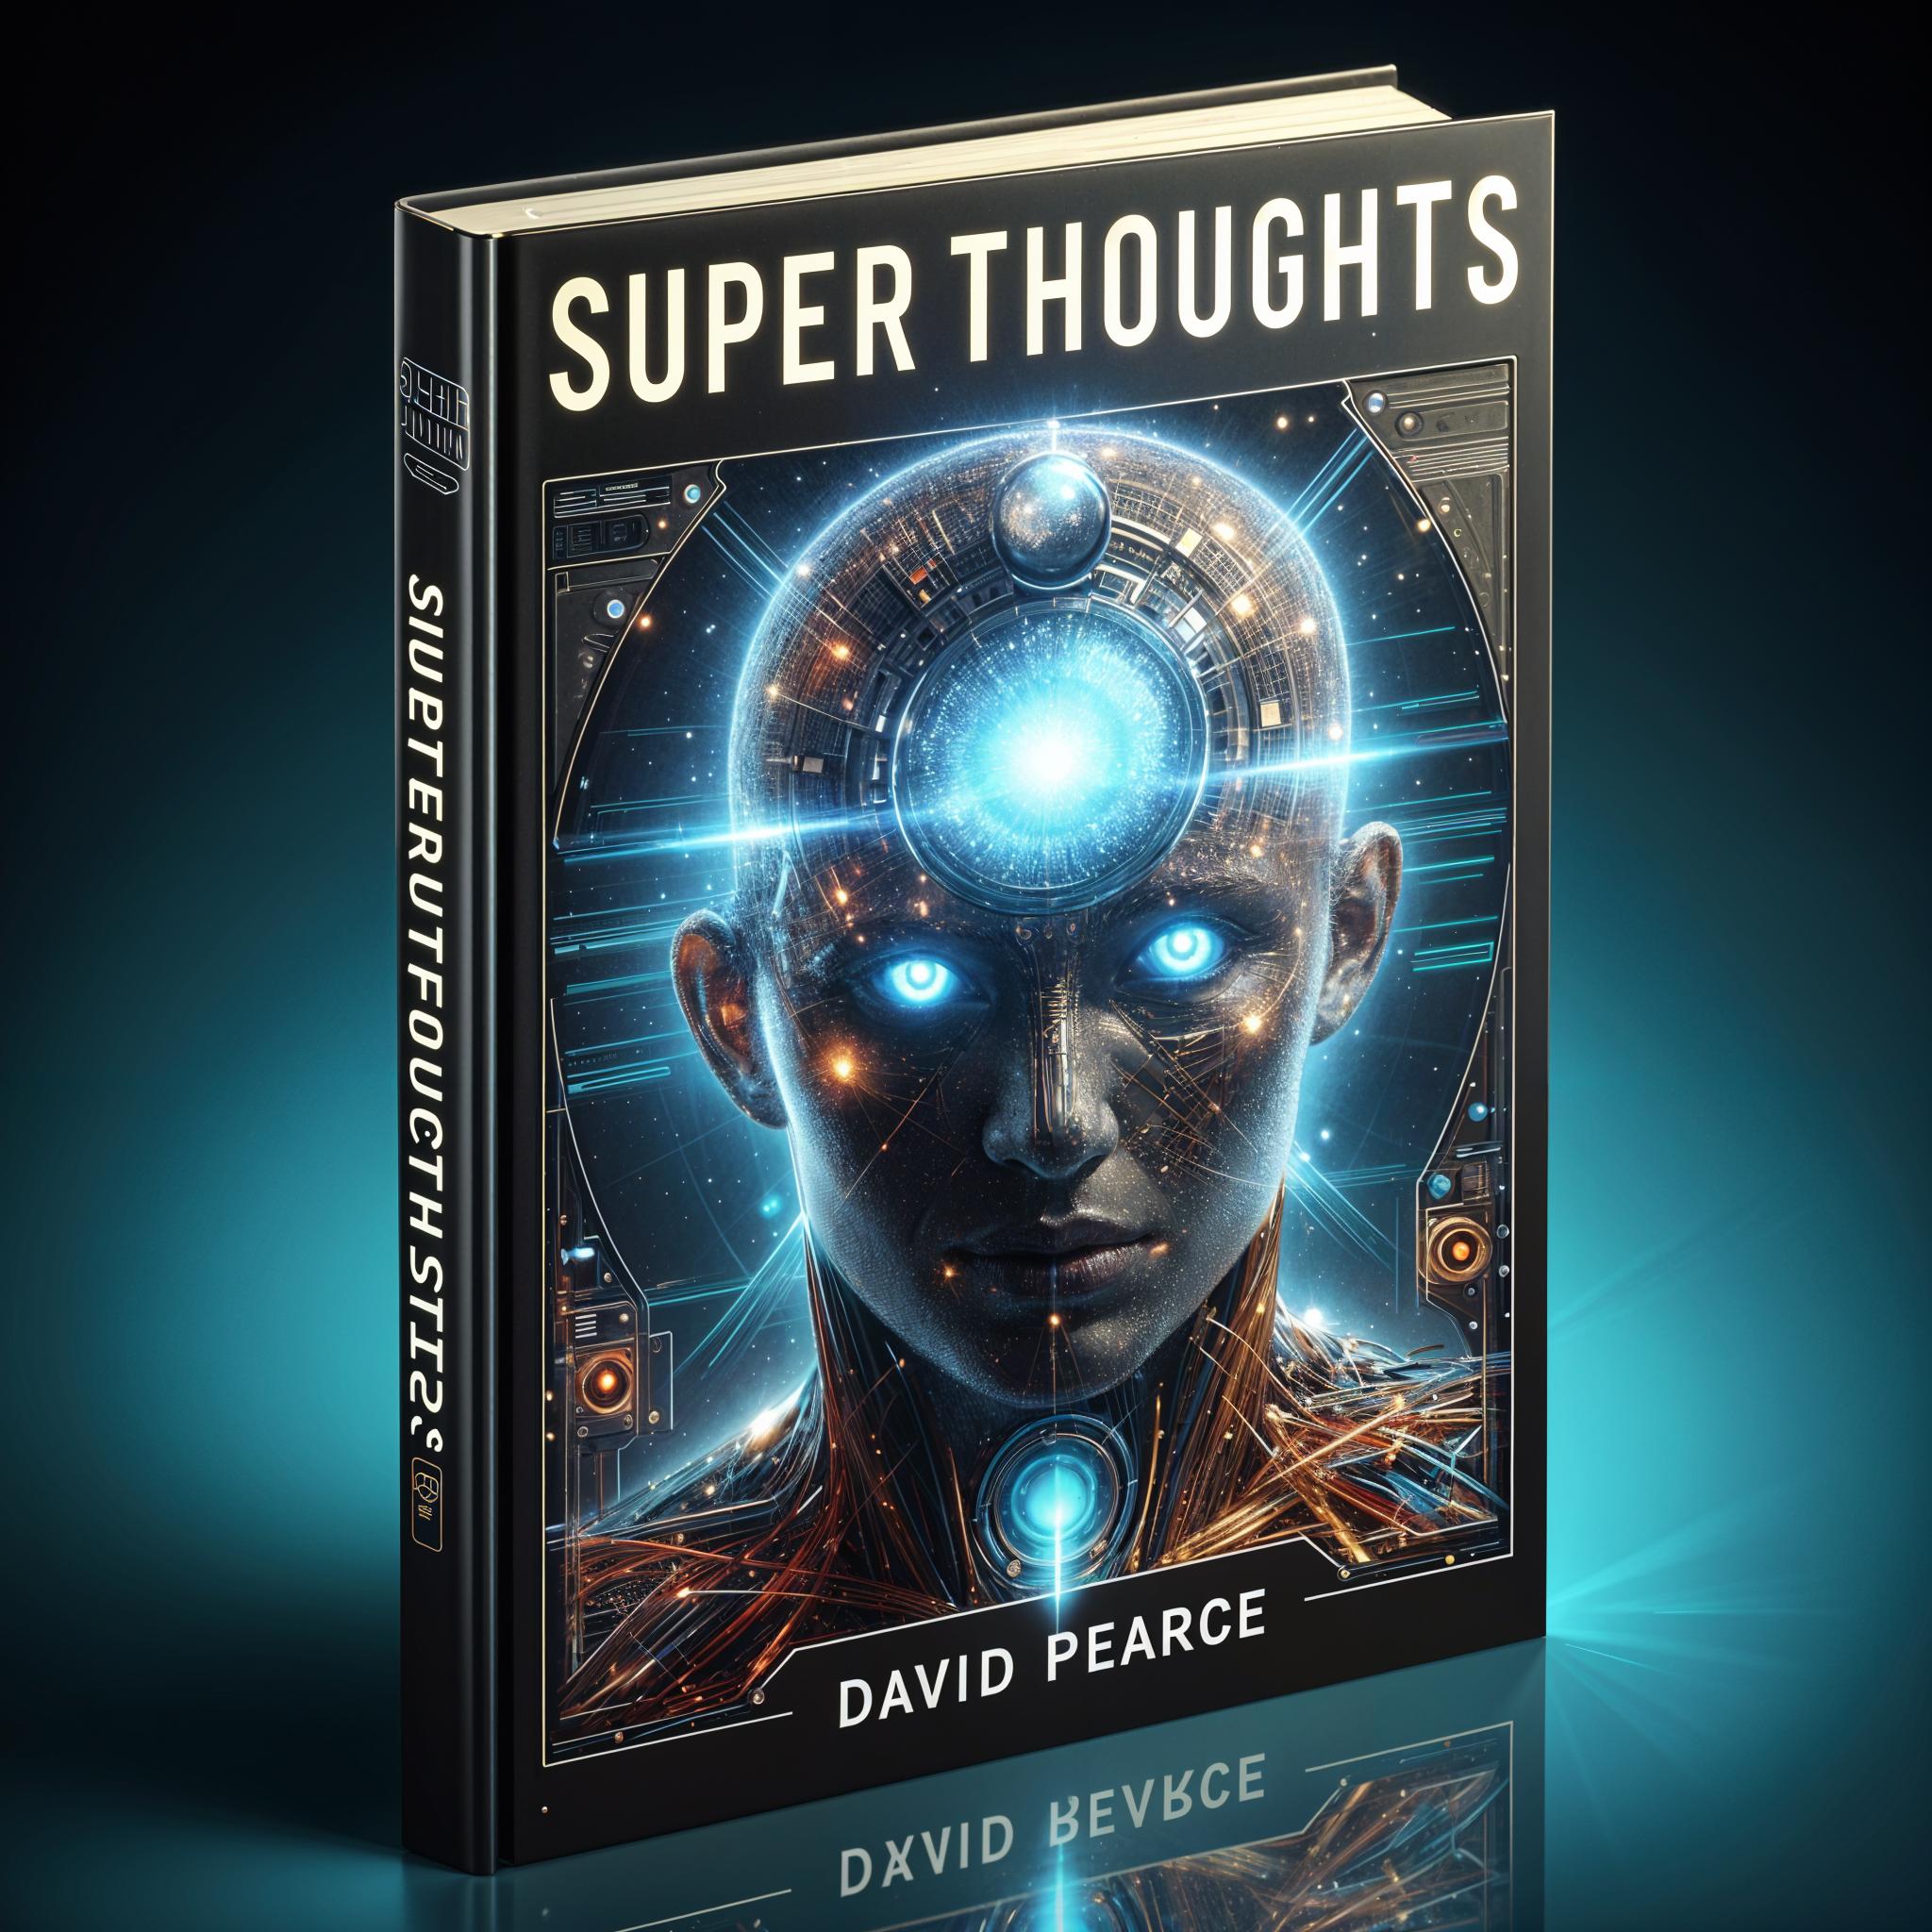 SuperThoughts by David Pearce